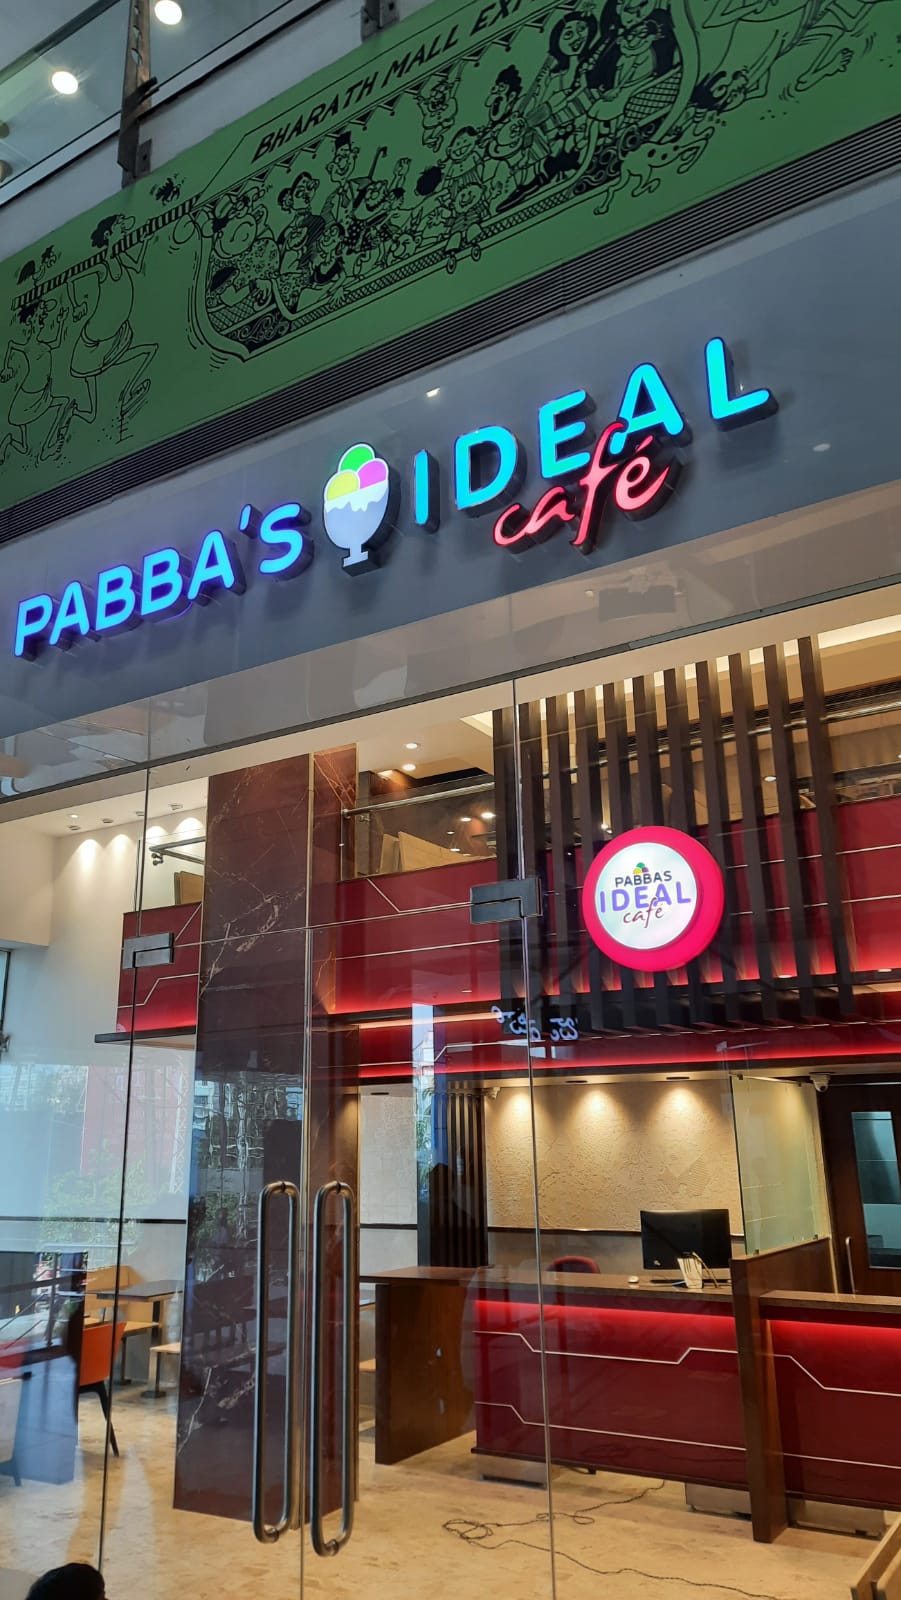 Pabbas Ideal Cafe to Open in Bharat Mall & We Are All Excited!! -